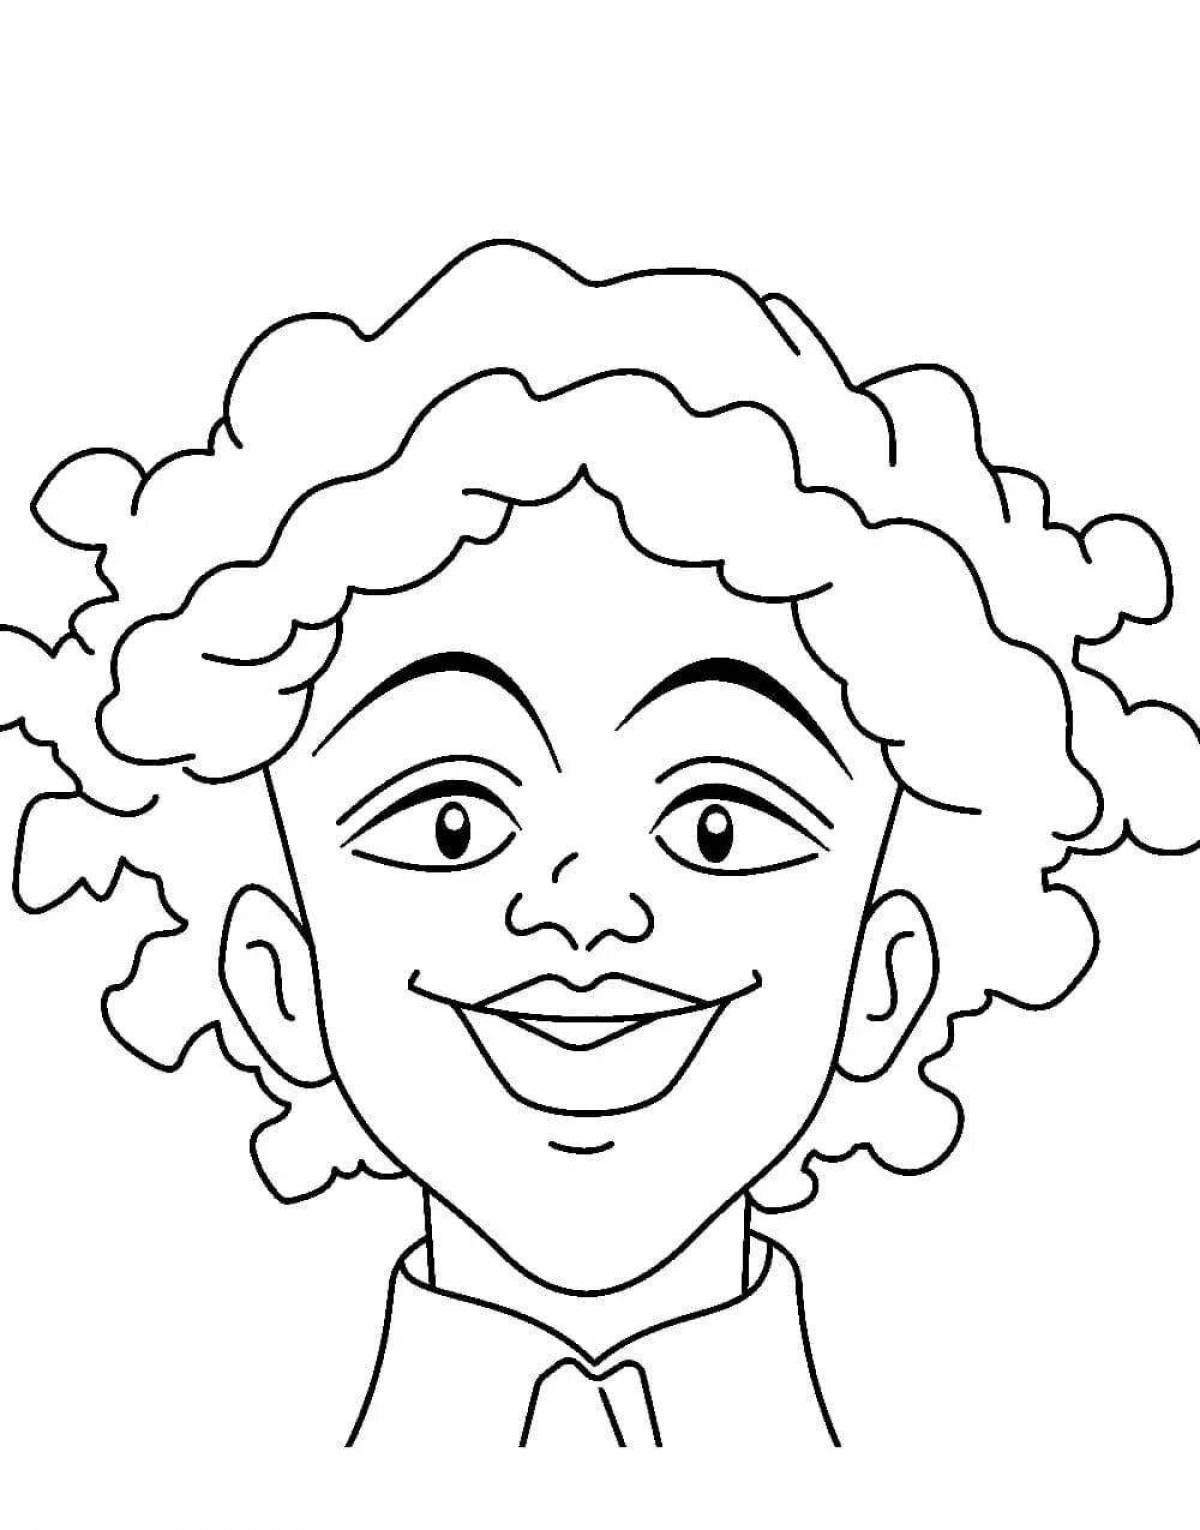 Connie coloring page